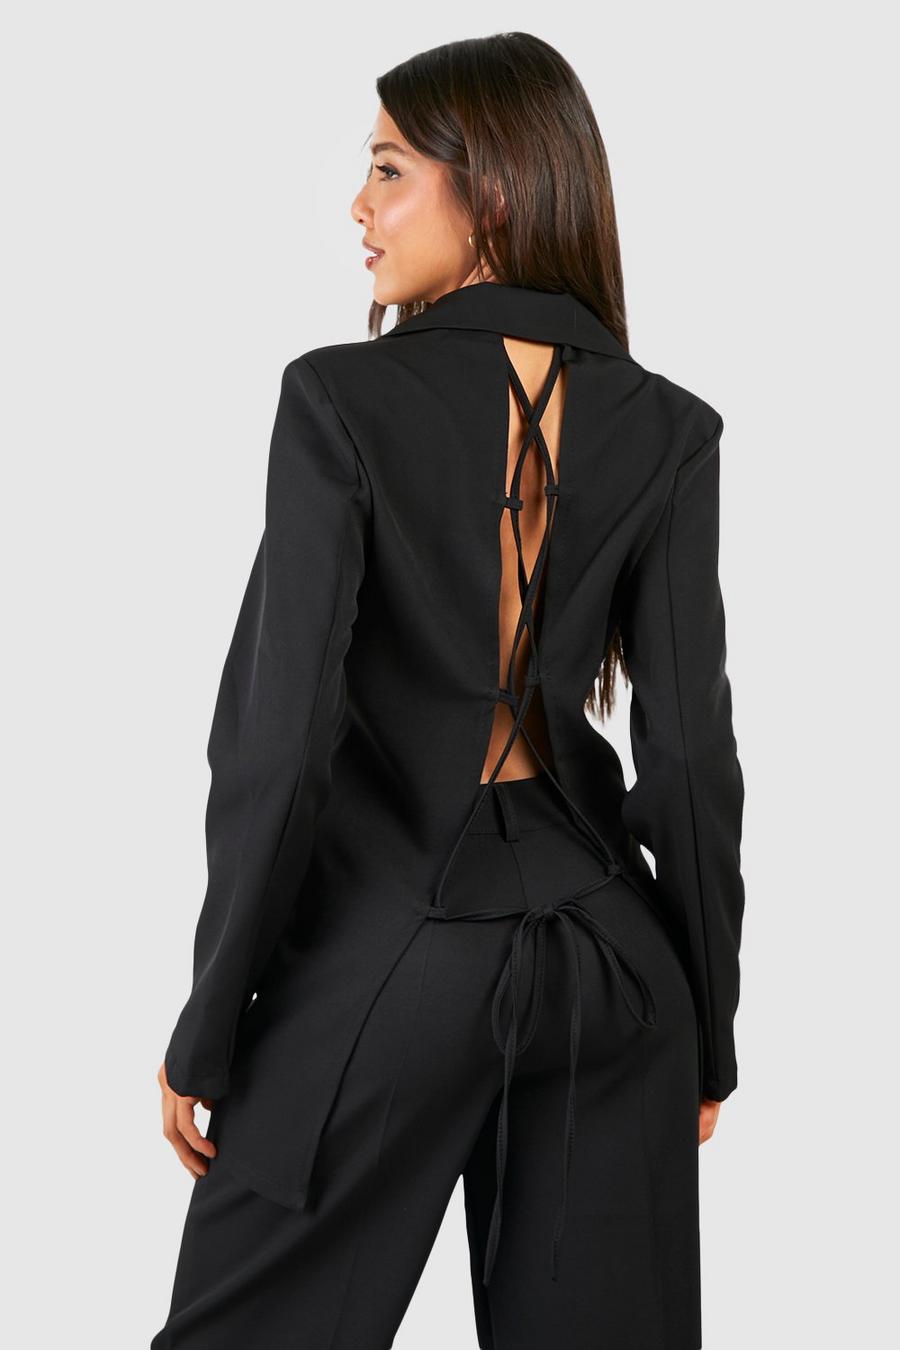 Black Lace Up Open Back Double Breasted Blazer